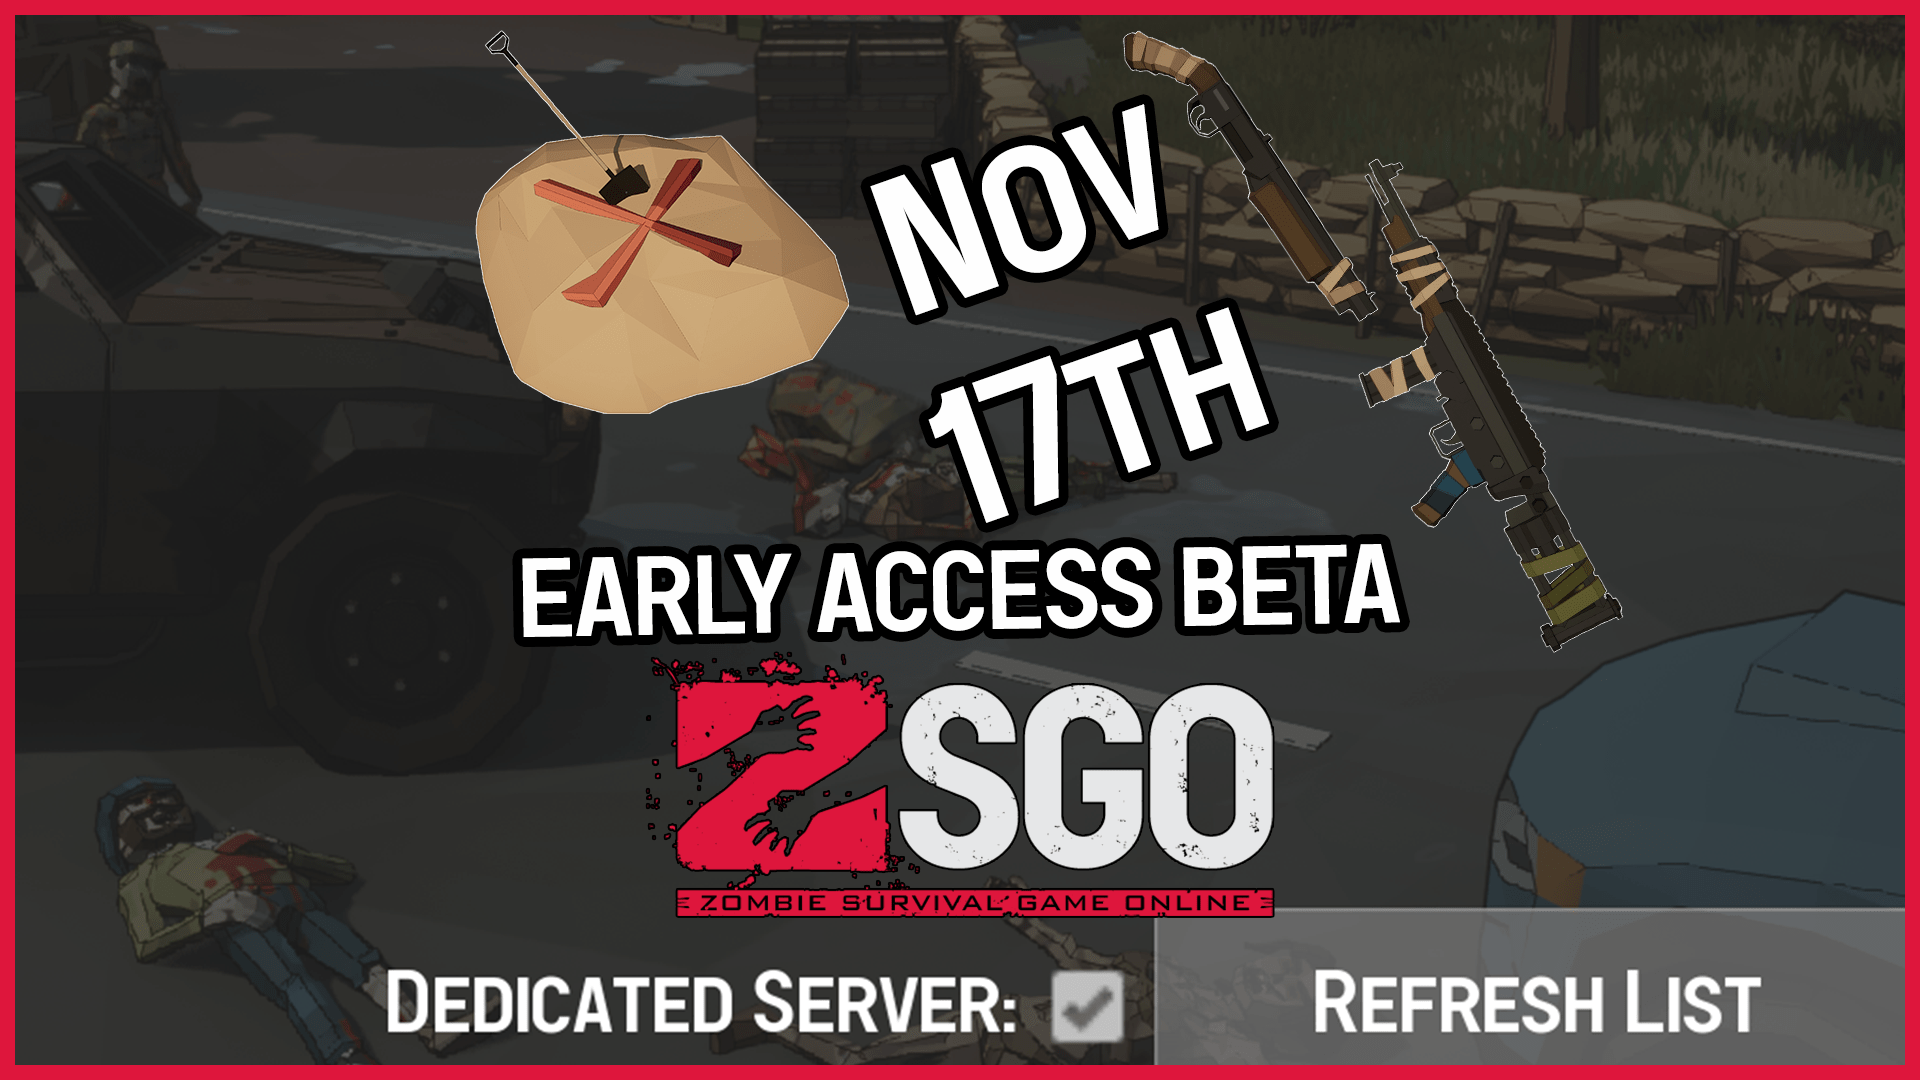 A collage of new features offered in the ZSGO early access beta.